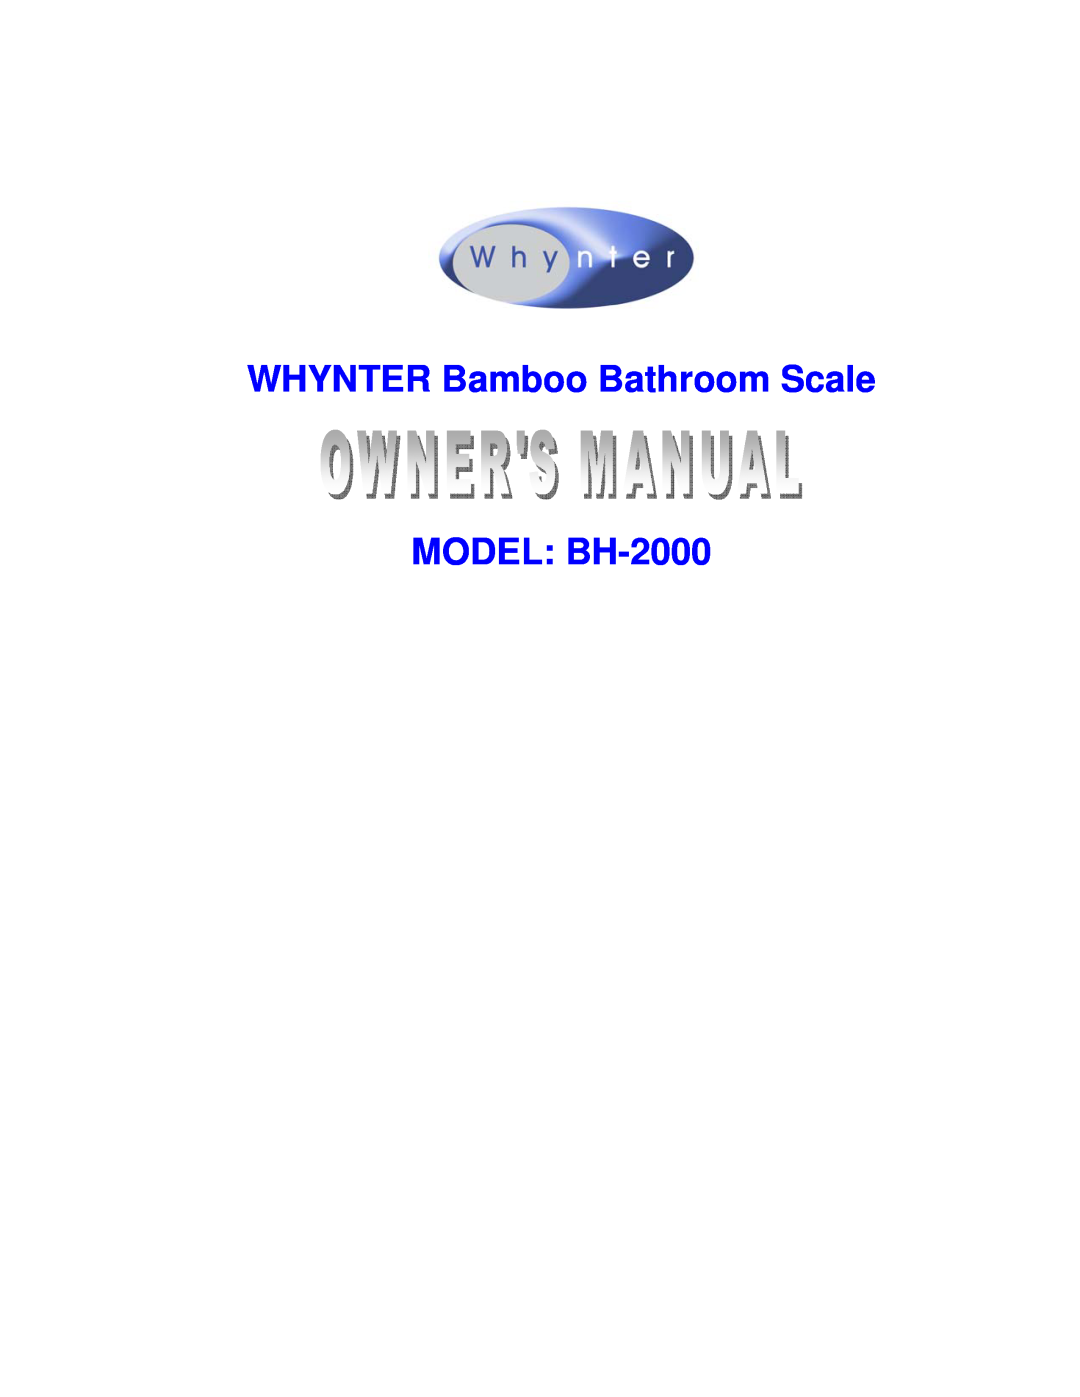 Whynter manual WHYNTER Bamboo Bathroom Scale, MODEL BH-2000 